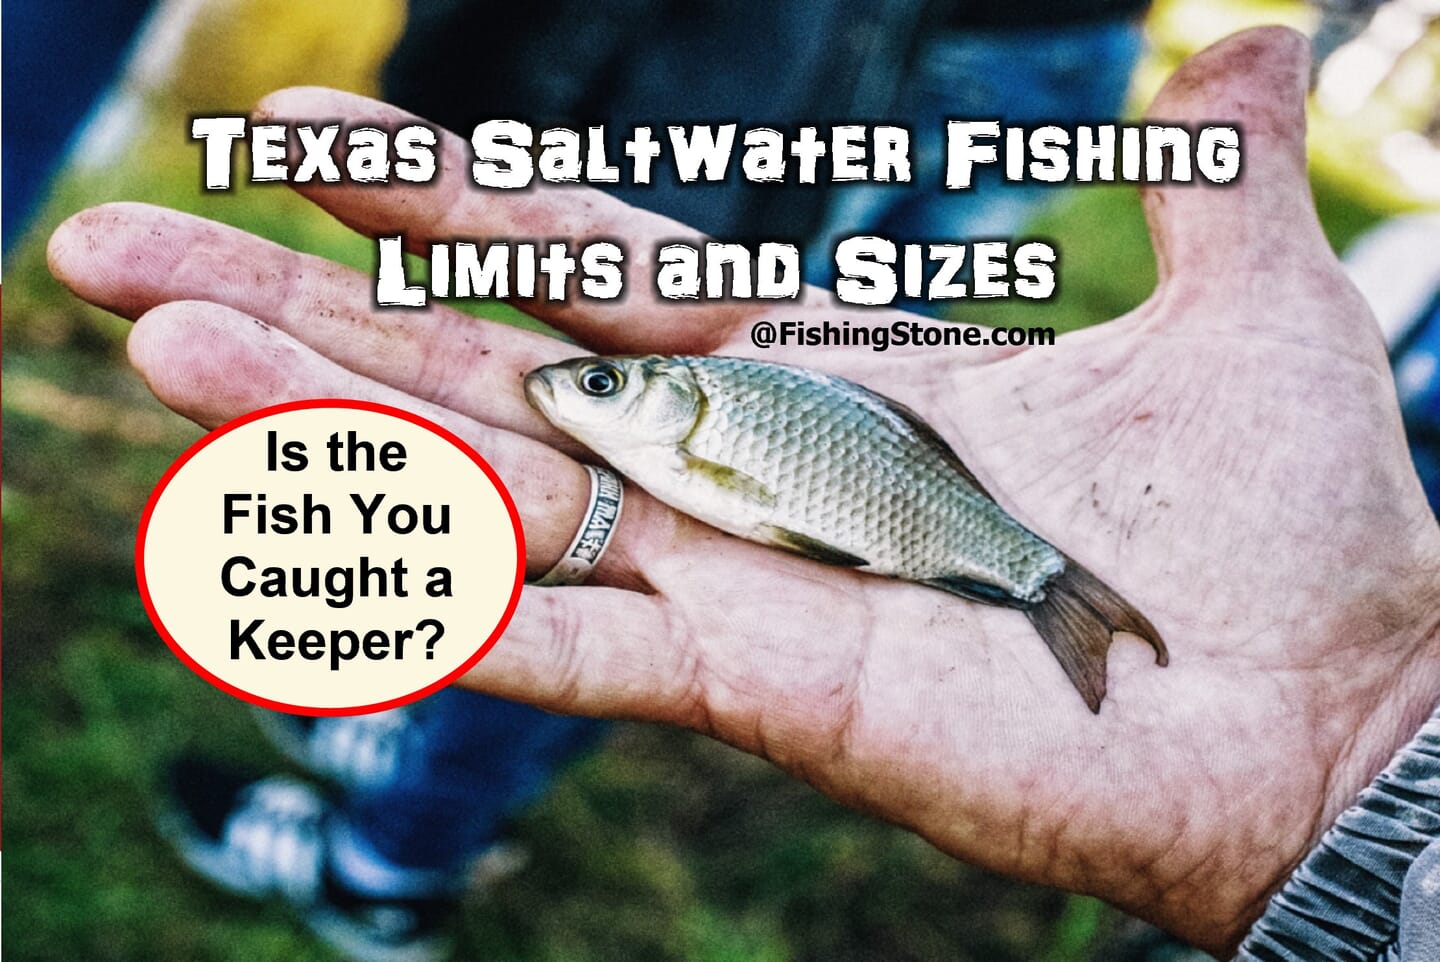 Texas Saltwater Fishing Details Spots License Locations Report Limits Sizes